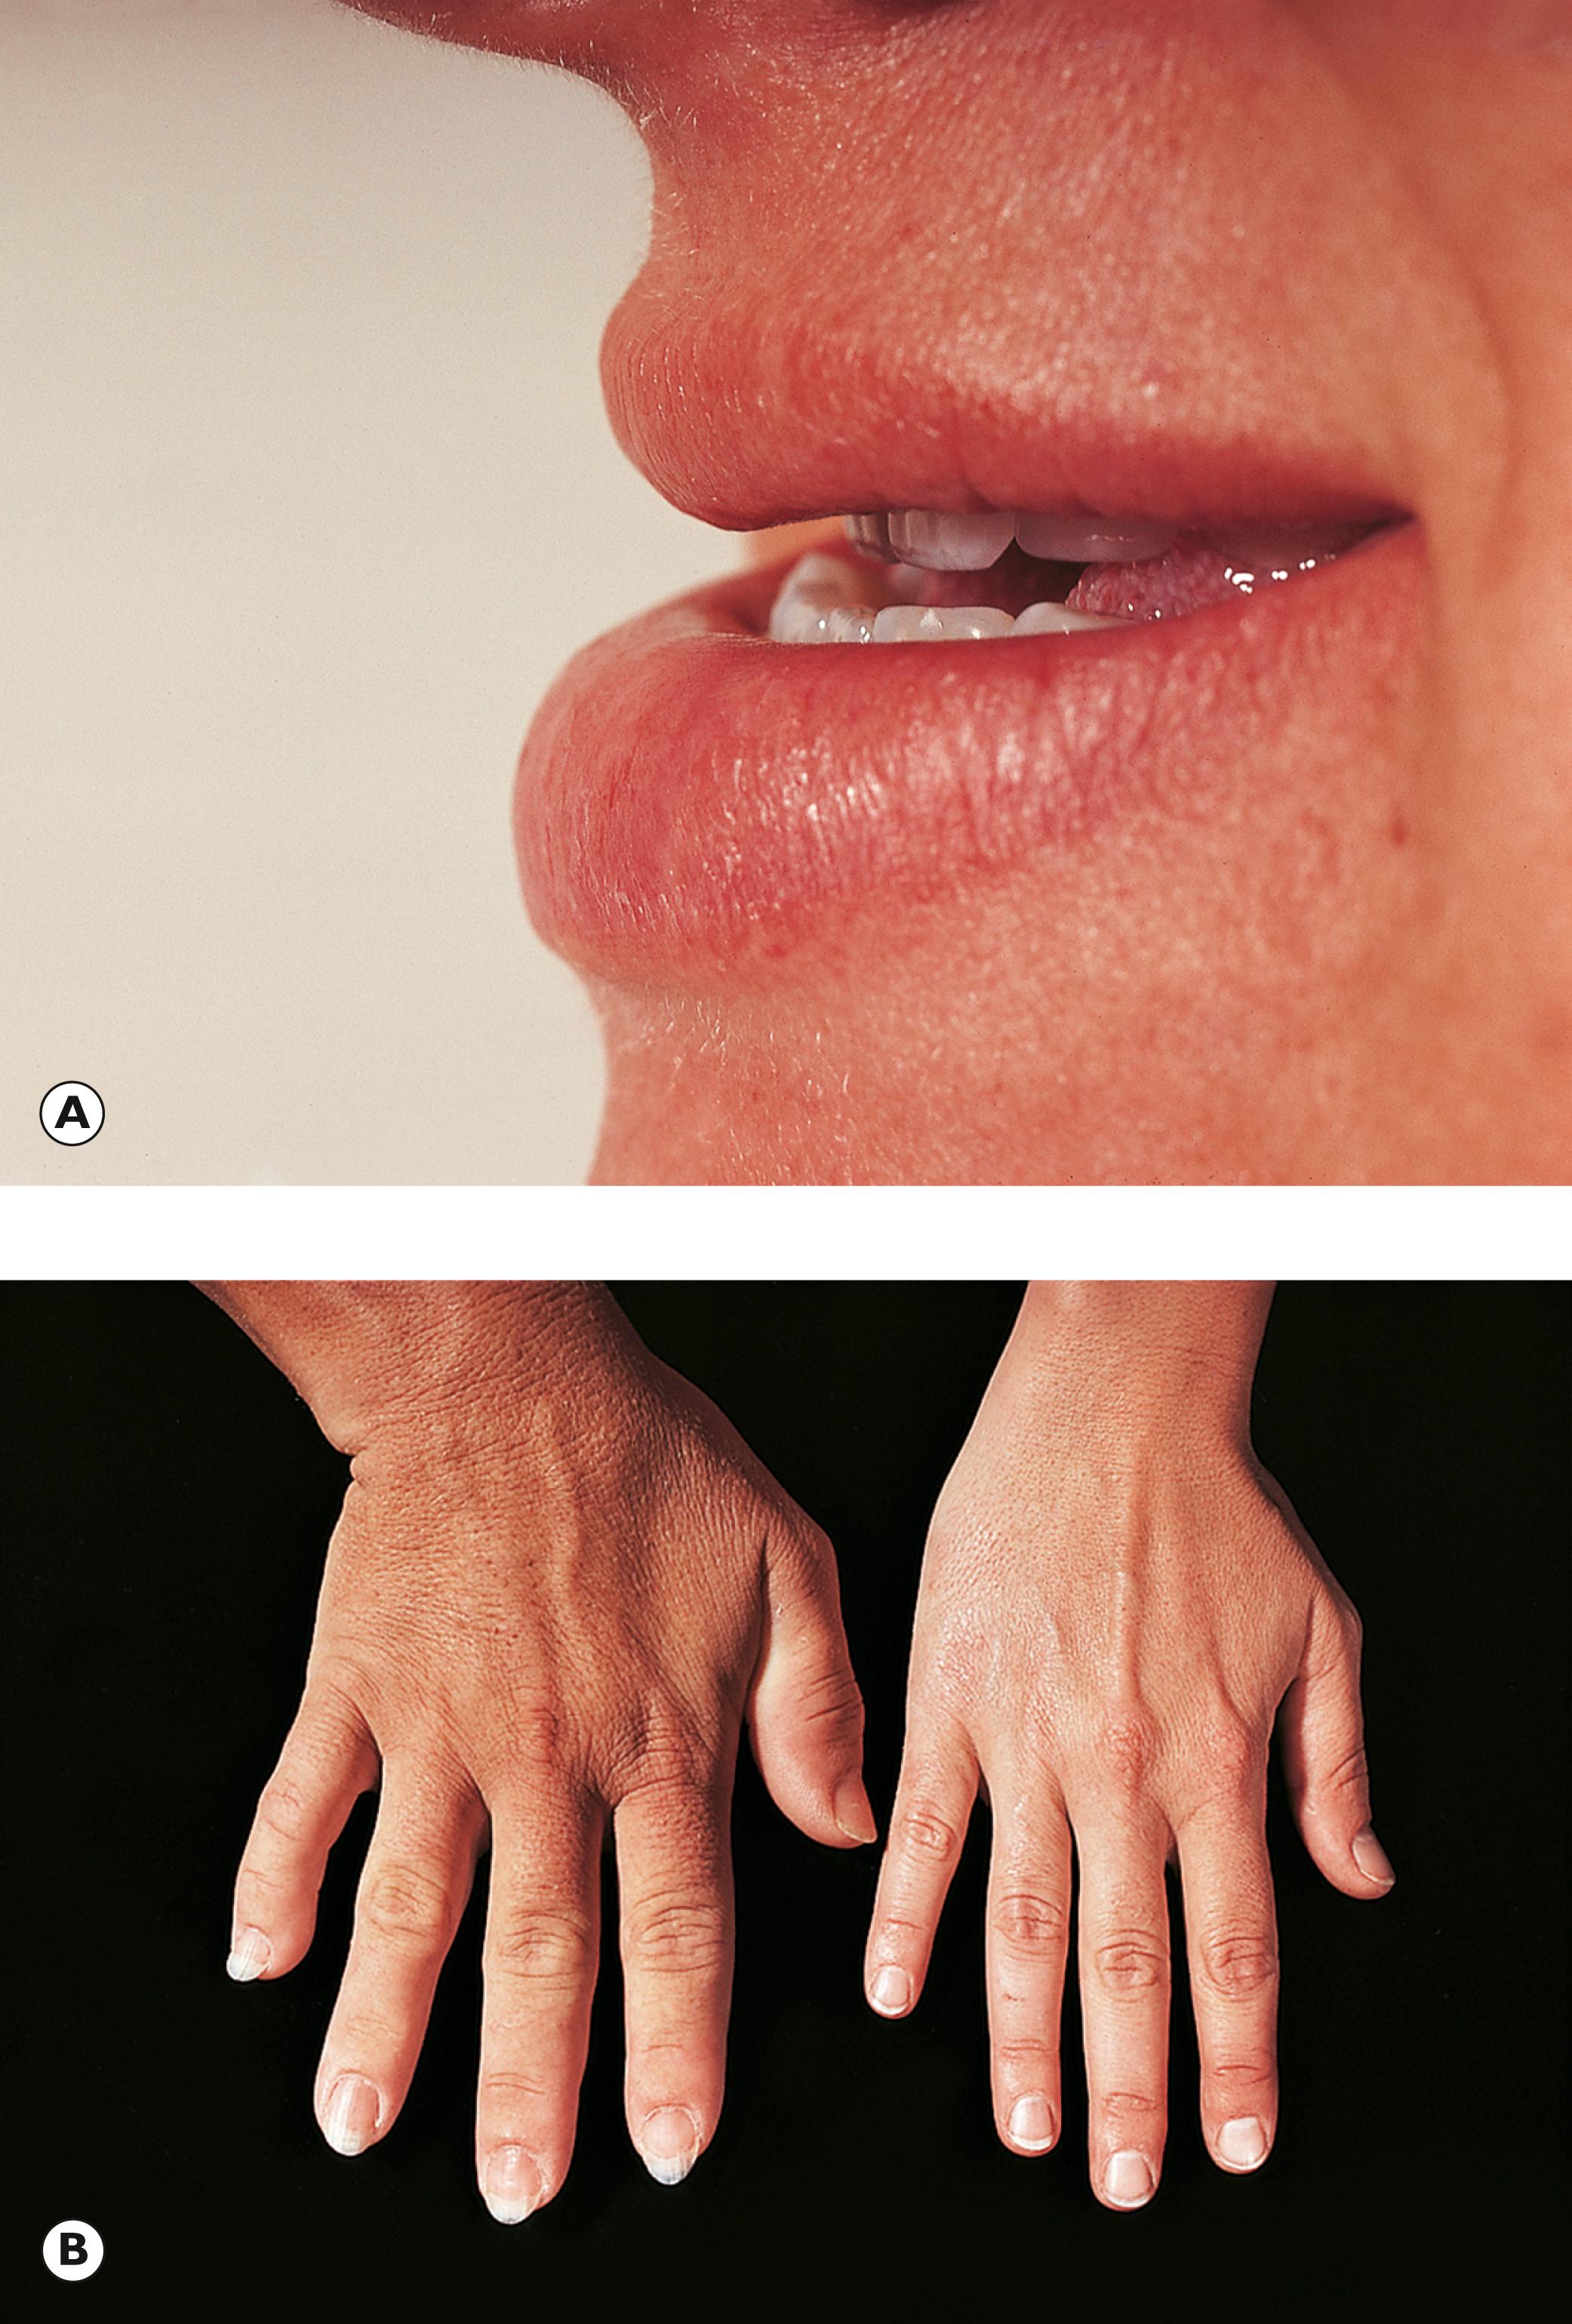 E-Fig. 20.1 G, Acromegaly, typical clinical manifestations. (A) Malocclusion of the teeth caused by overgrowth of the mandible. The patient had noted her facial appearance had been changing. (B) The hand on the left of the image belongs to the same patient. This has an enlarged ‘spade-like’ appearance in contrast to the healthy hand seen on the right of the image.